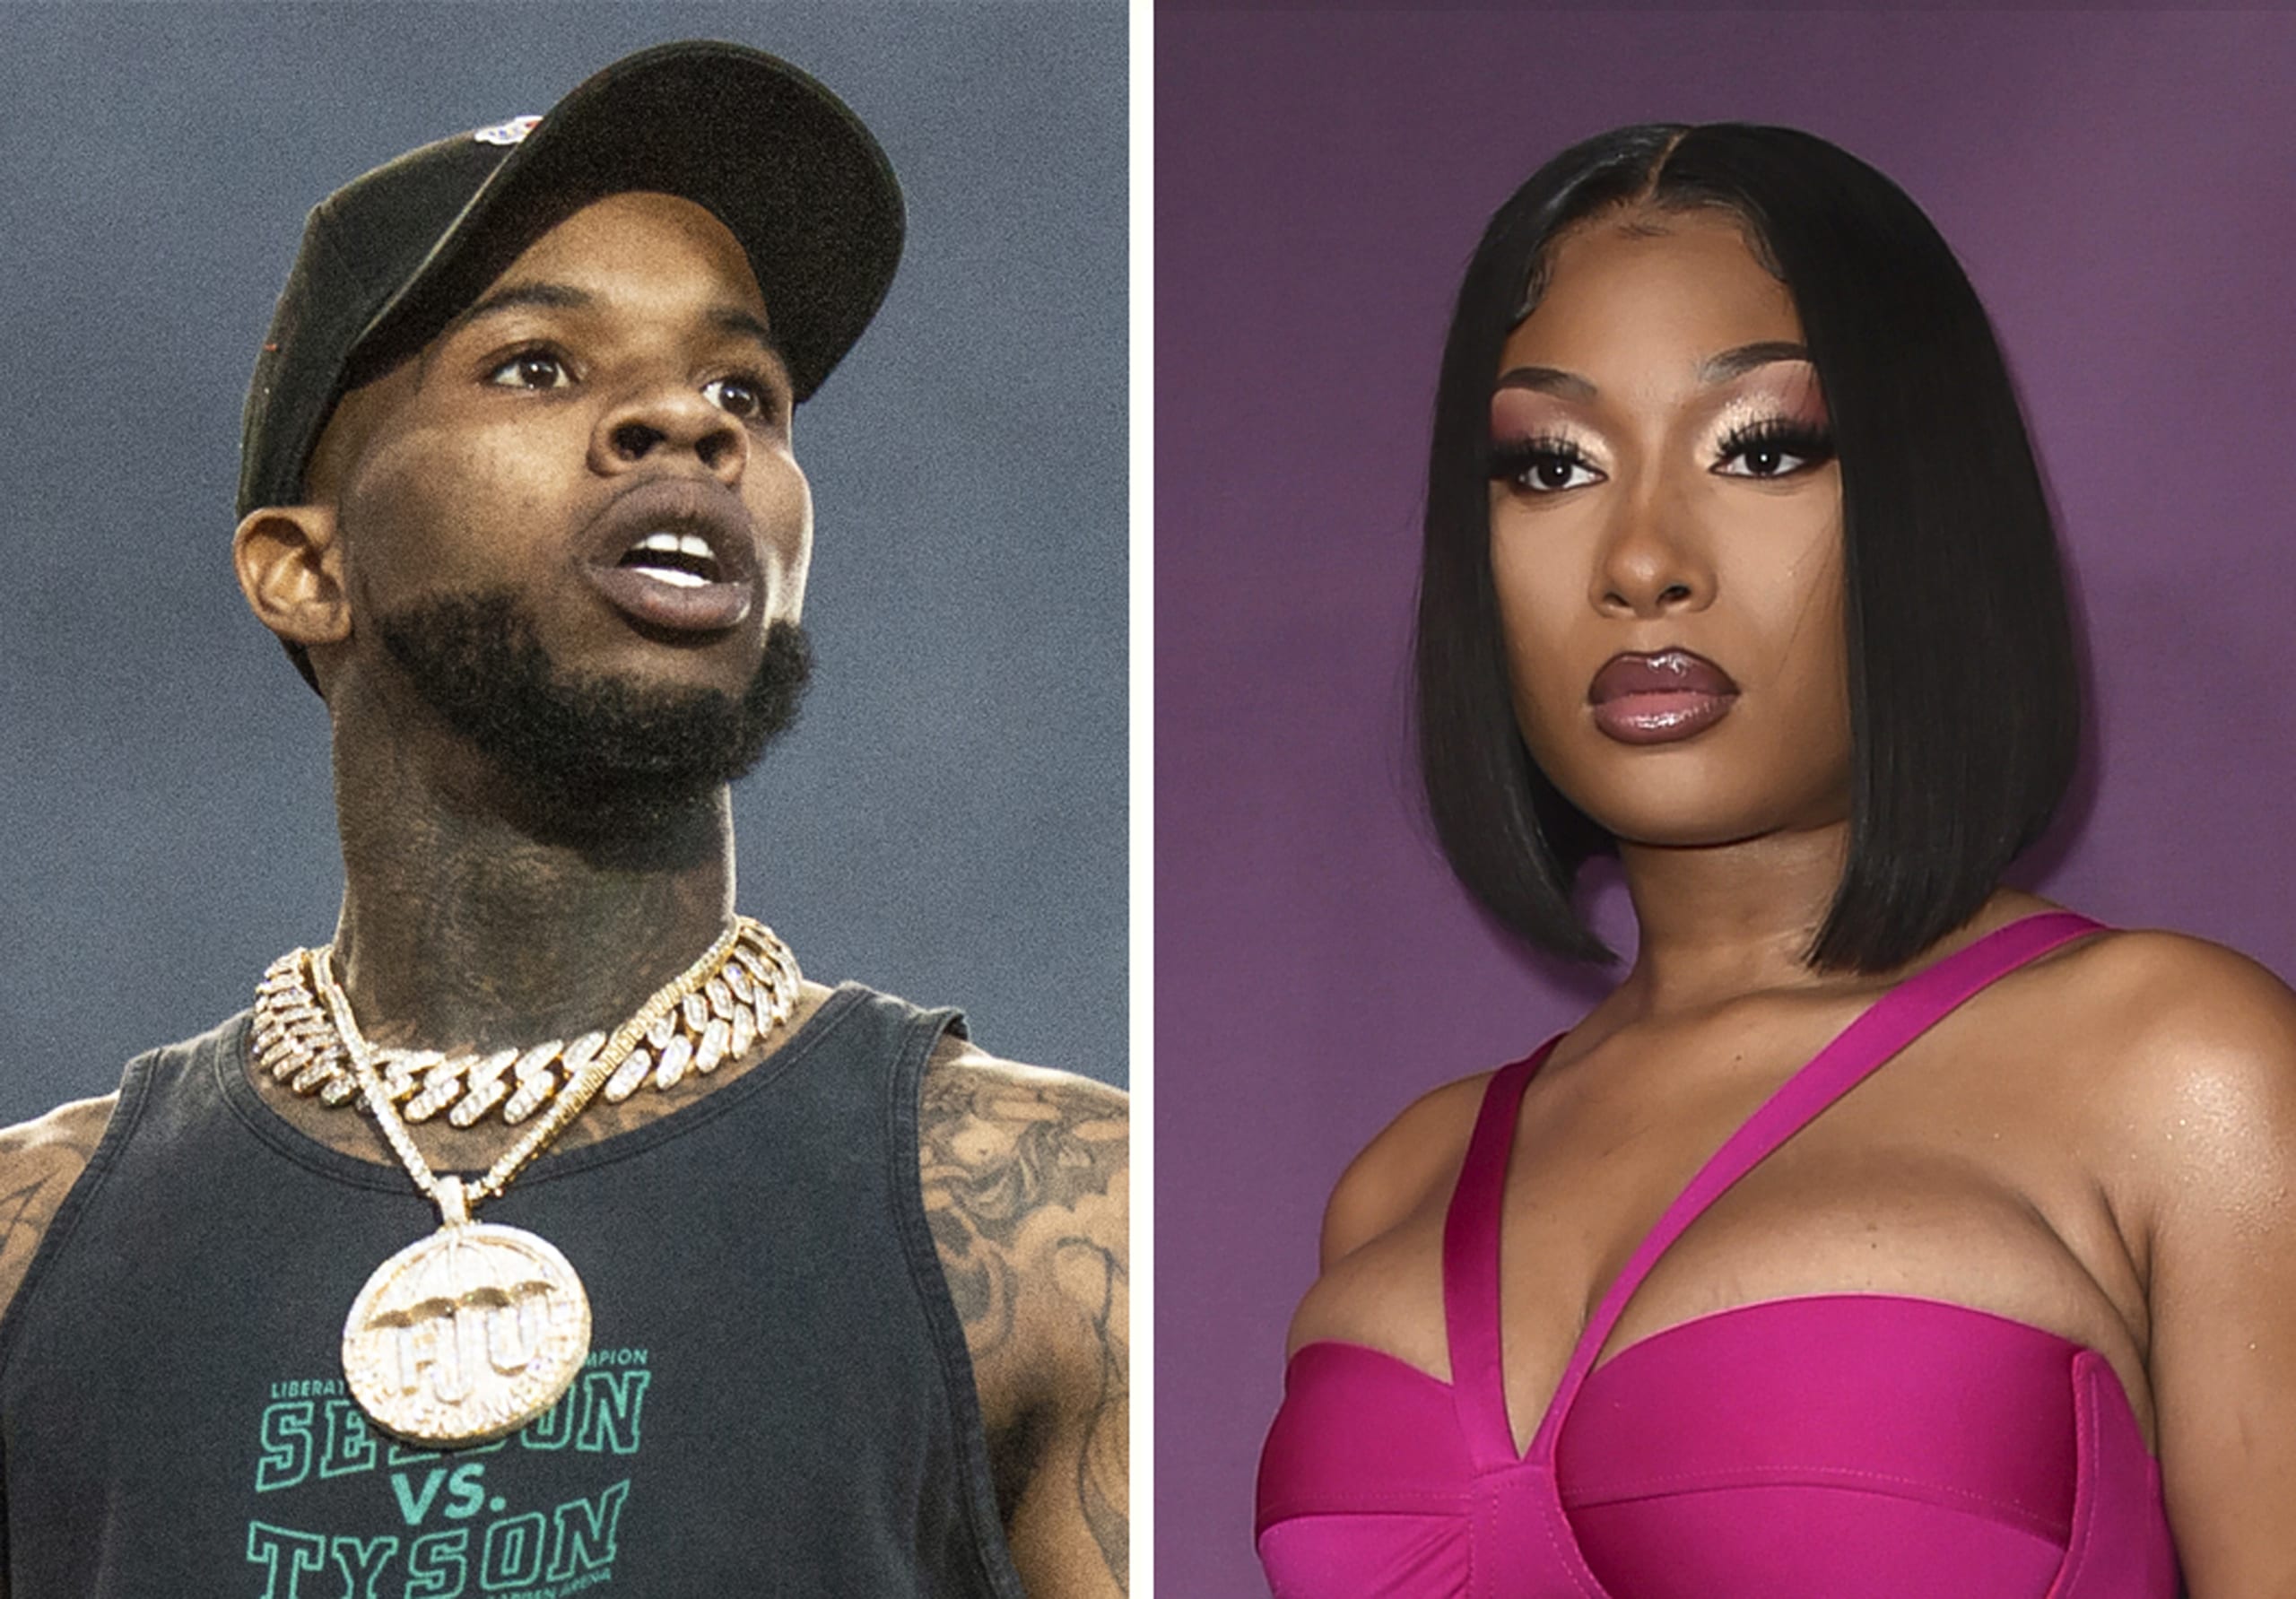 Megan Thee Stallion describes daily suffering after Tory Lanez shooting during rapper’s sentencing 